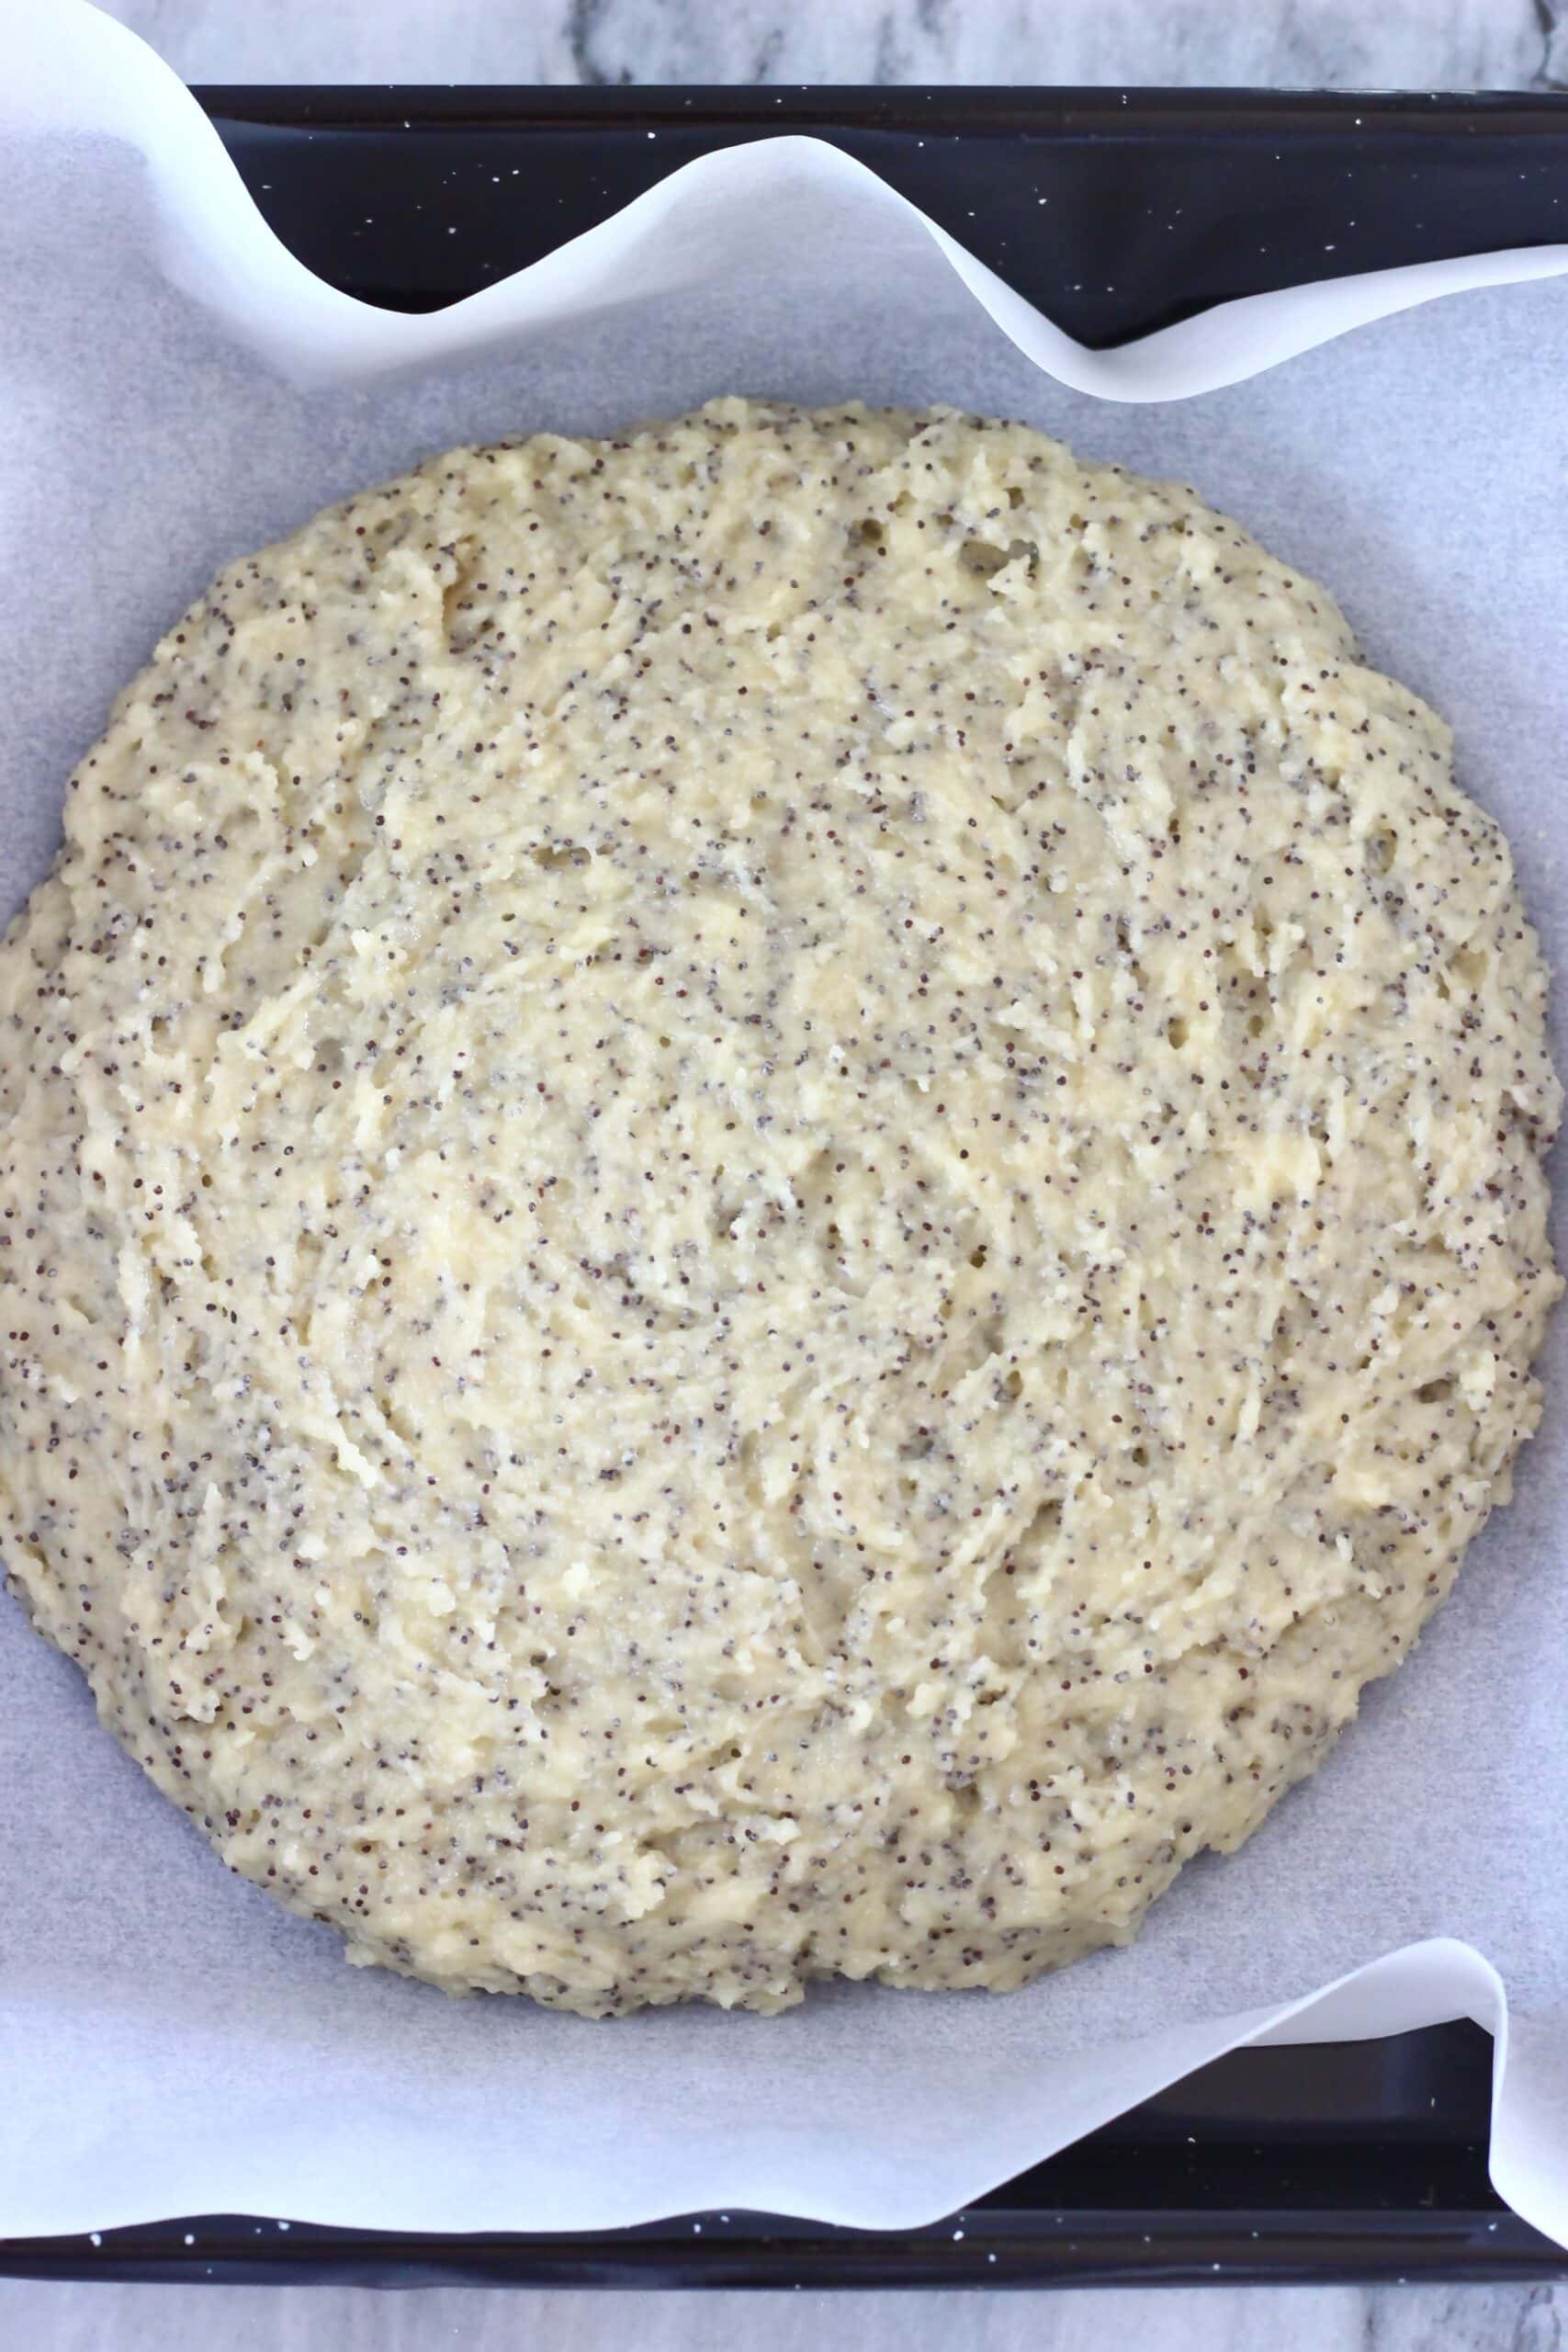 A circle of raw gluten-free vegan lemon poppy seed scones dough on a baking tray lined with baking paper